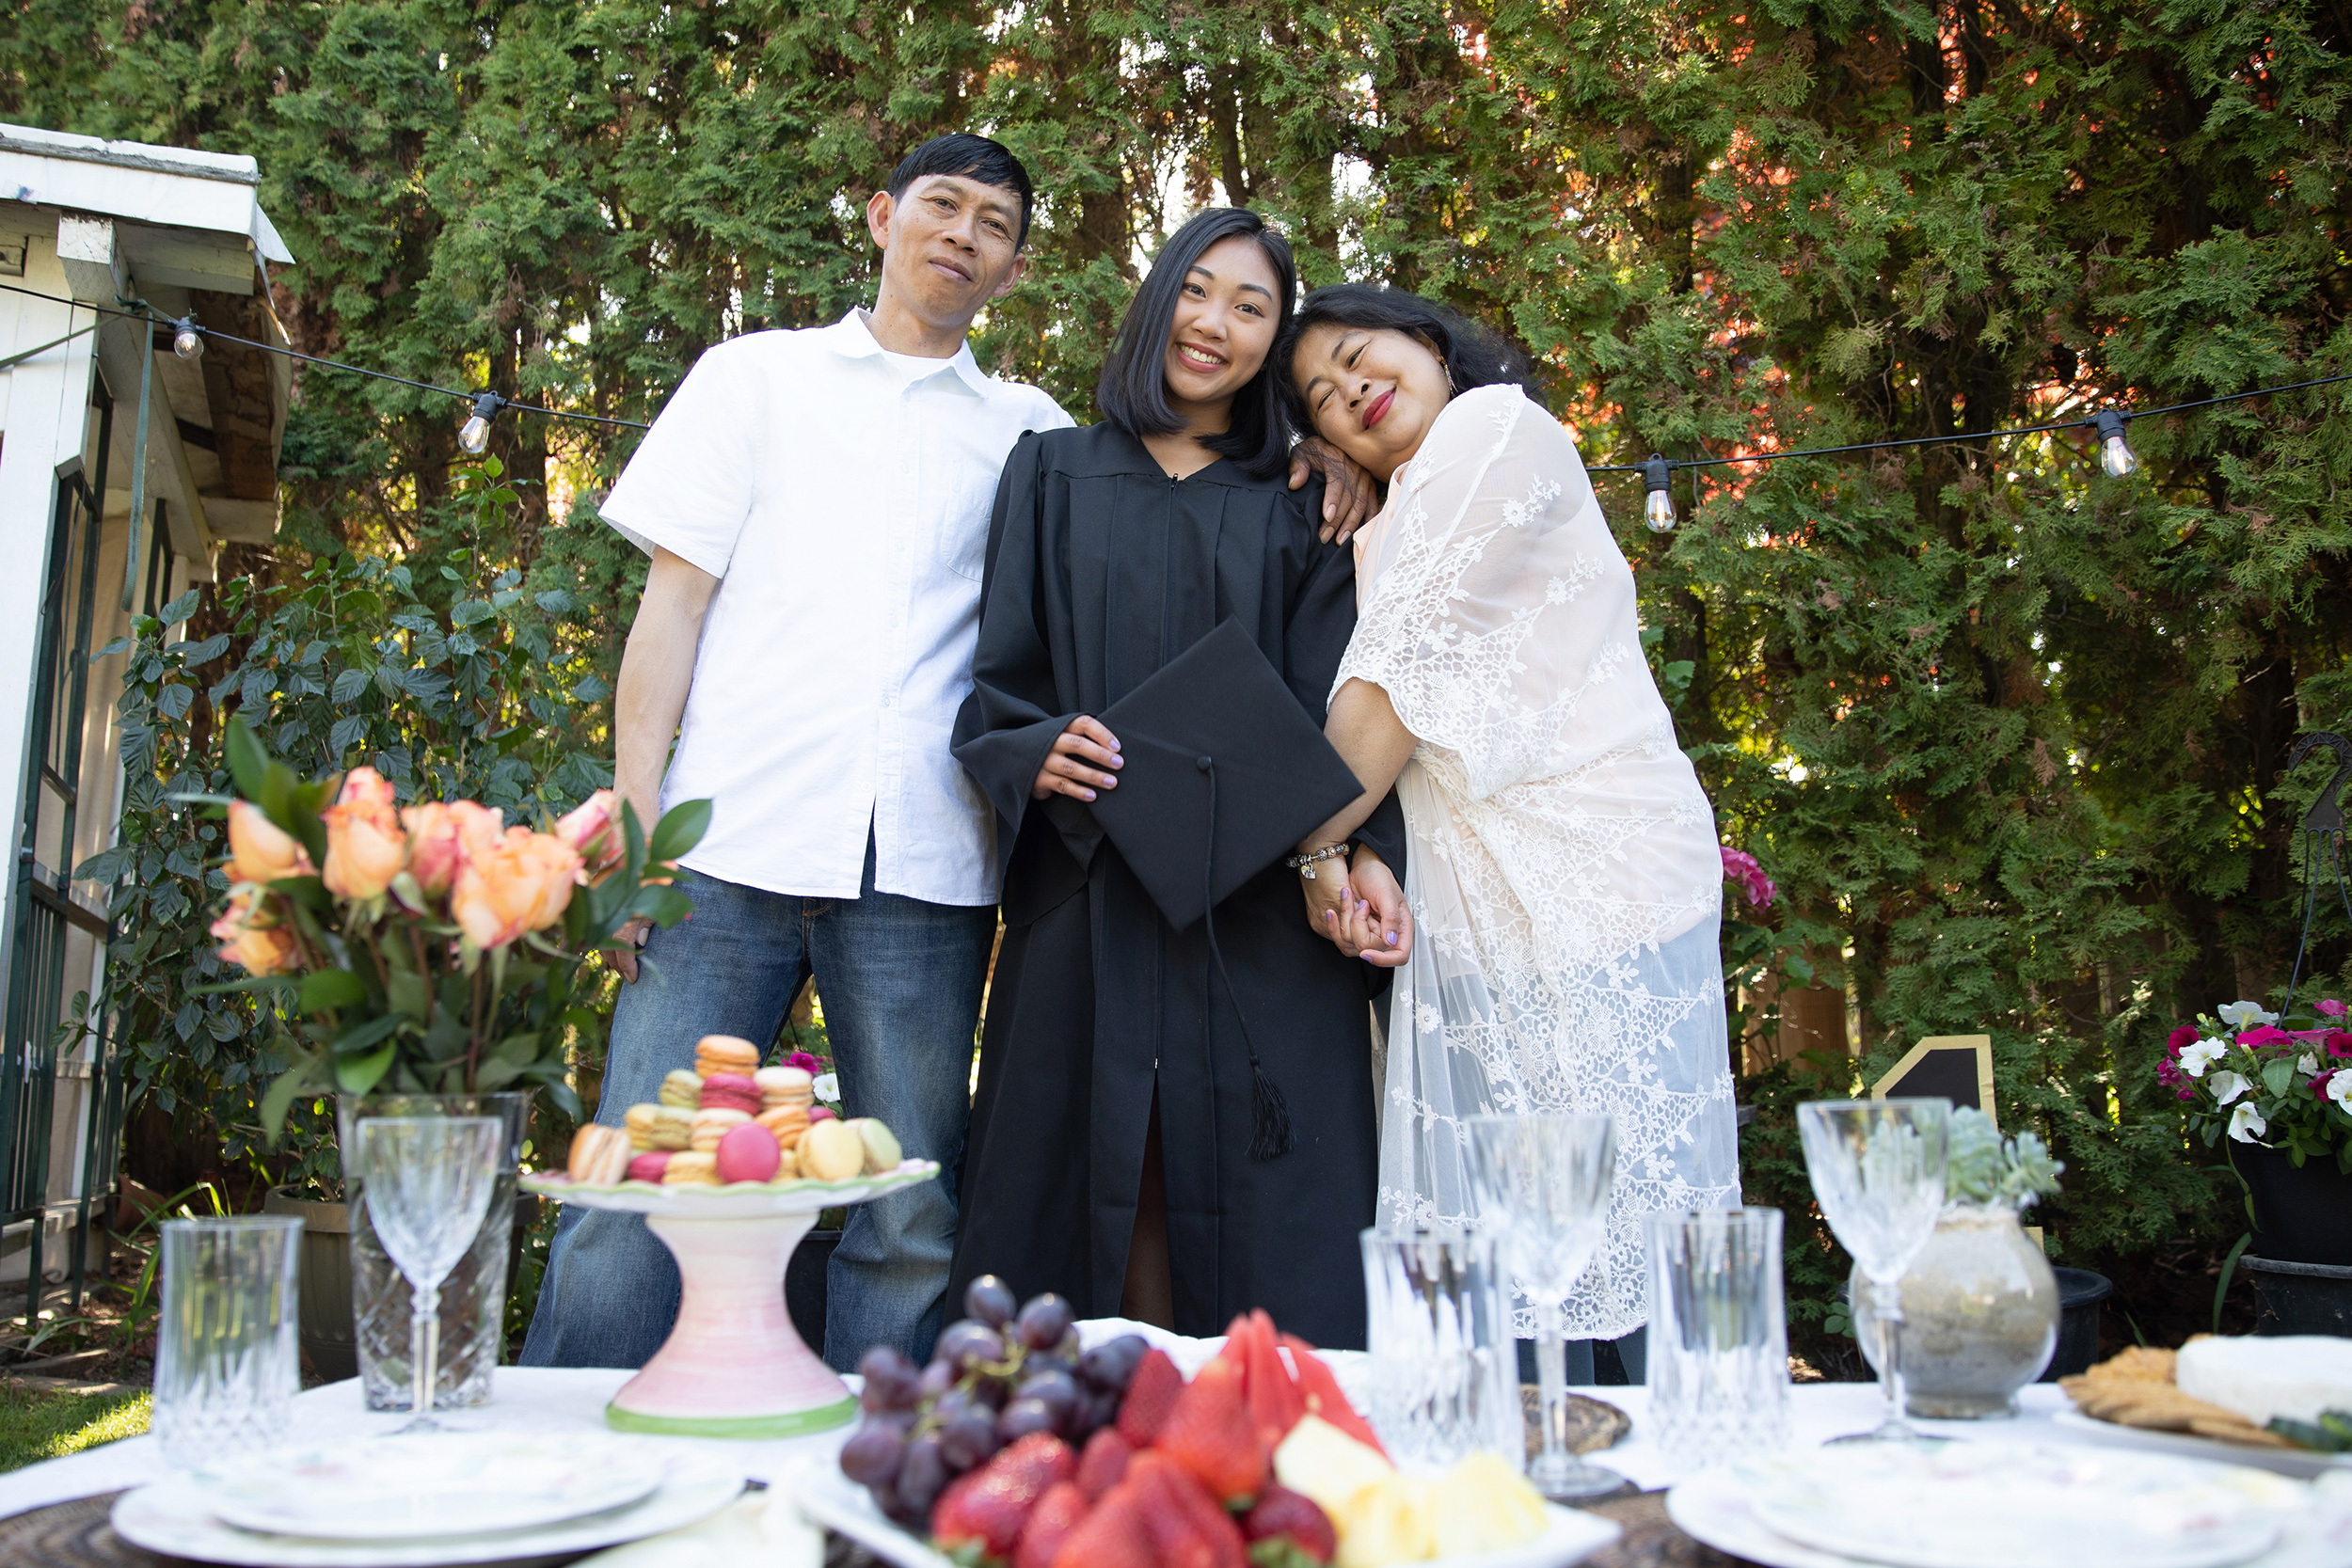 Student in graduation gown, posing with her parents at an outdoor celebration